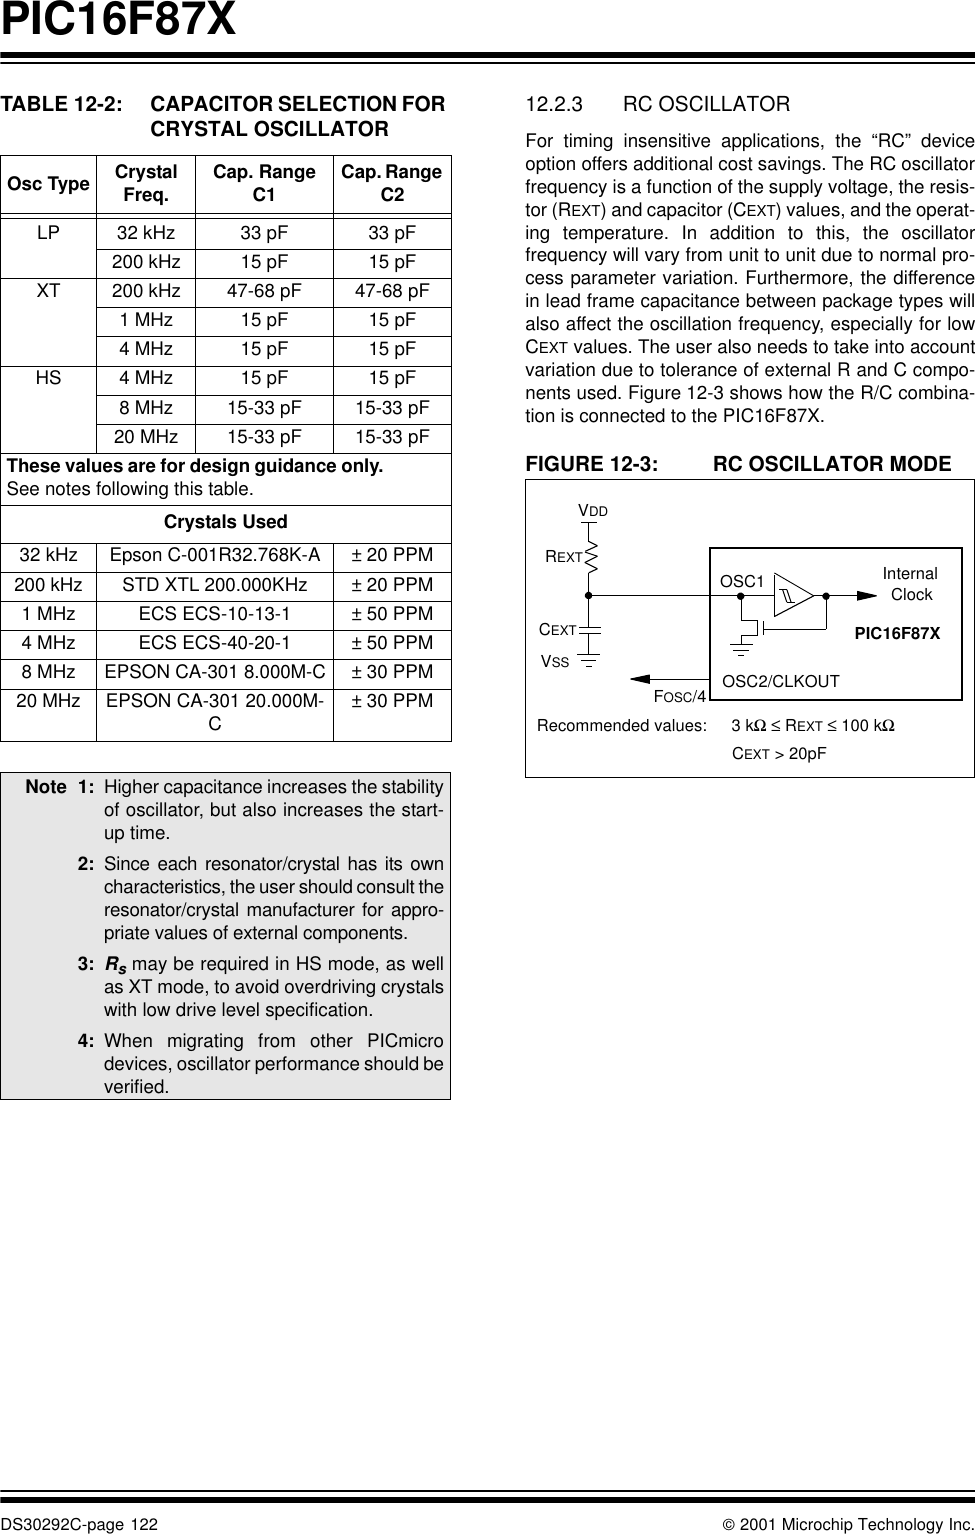 PIC16F87XDS30292C-page 122  2001 Microchip Technology Inc.TABLE 12-2: CAPACITOR SELECTION FOR CRYSTAL OSCILLATOR  12.2.3 RC OSCILLATORFor timing insensitive applications, the “RC” deviceoption offers additional cost savings. The RC oscillatorfrequency is a function of the supply voltage, the resis-tor (REXT) and capacitor (CEXT) values, and the operat-ing temperature. In addition to this, the oscillatorfrequency will vary from unit to unit due to normal pro-cess parameter variation. Furthermore, the differencein lead frame capacitance between package types willalso affect the oscillation frequency, especially for lowCEXT values. The user also needs to take into accountvariation due to tolerance of external R and C compo-nents used. Figure 12-3 shows how the R/C combina-tion is connected to the PIC16F87X. FIGURE 12-3: RC OSCILLATOR MODEOsc Type Crystal Freq. Cap. Range C1 Cap. Range C2LP 32 kHz 33 pF 33 pF200 kHz 15 pF 15 pFXT 200 kHz 47-68 pF 47-68 pF1 MHz 15 pF 15 pF4 MHz 15 pF 15 pFHS 4 MHz 15 pF 15 pF8 MHz 15-33 pF 15-33 pF20 MHz 15-33 pF 15-33 pFThese values are for design guidance only. See notes following this table.Crystals Used32 kHz Epson C-001R32.768K-A ± 20 PPM200 kHz STD XTL 200.000KHz ± 20 PPM1 MHz ECS ECS-10-13-1 ± 50 PPM4 MHz ECS ECS-40-20-1 ± 50 PPM8 MHz EPSON CA-301 8.000M-C ± 30 PPM20 MHz EPSON CA-301 20.000M-C± 30 PPMNote 1: Higher capacitance increases the stabilityof oscillator, but also increases the start-up time. 2: Since each resonator/crystal has its owncharacteristics, the user should consult theresonator/crystal manufacturer for appro-priate values of external components.3: Rs may be required in HS mode, as wellas XT mode, to avoid overdriving crystalswith low drive level specification.4: When migrating from other PICmicrodevices, oscillator performance should beverified.OSC2/CLKOUTCEXTREXTPIC16F87XOSC1FOSC/4InternalClockVDDVSSRecommended values: 3 kΩ ≤ REXT ≤ 100 kΩCEXT &gt; 20pF